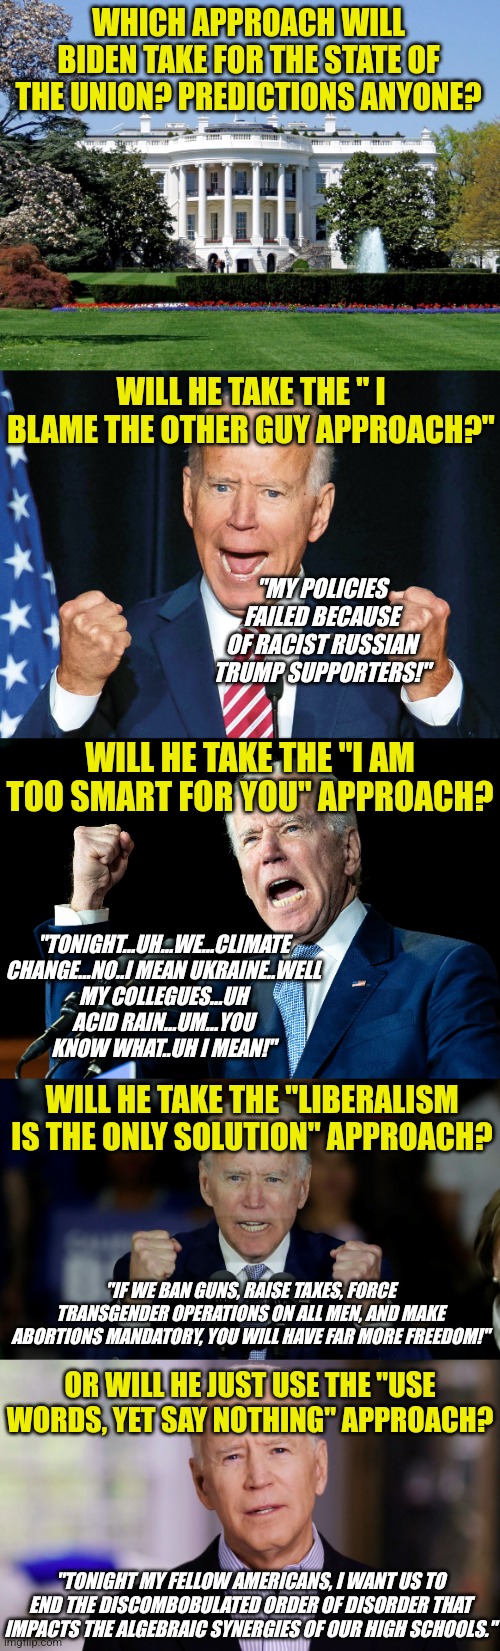 State of the Union, Biden's chance to shine....or more likely an opportunity to terrify Americans who voted for him... |  WHICH APPROACH WILL BIDEN TAKE FOR THE STATE OF THE UNION? PREDICTIONS ANYONE? WILL HE TAKE THE " I BLAME THE OTHER GUY APPROACH?"; "MY POLICIES FAILED BECAUSE OF RACIST RUSSIAN TRUMP SUPPORTERS!"; WILL HE TAKE THE "I AM TOO SMART FOR YOU" APPROACH? "TONIGHT...UH...WE...CLIMATE CHANGE...NO..I MEAN UKRAINE..WELL MY COLLEGUES...UH ACID RAIN...UM...YOU KNOW WHAT..UH I MEAN!"; WILL HE TAKE THE "LIBERALISM IS THE ONLY SOLUTION" APPROACH? "IF WE BAN GUNS, RAISE TAXES, FORCE TRANSGENDER OPERATIONS ON ALL MEN, AND MAKE ABORTIONS MANDATORY, YOU WILL HAVE FAR MORE FREEDOM!"; OR WILL HE JUST USE THE "USE WORDS, YET SAY NOTHING" APPROACH? "TONIGHT MY FELLOW AMERICANS, I WANT US TO END THE DISCOMBOBULATED ORDER OF DISORDER THAT IMPACTS THE ALGEBRAIC SYNERGIES OF OUR HIGH SCHOOLS." | image tagged in white house,crazy joe biden,joe biden - nap times for everyone,angry joe biden,joe biden 2020 | made w/ Imgflip meme maker